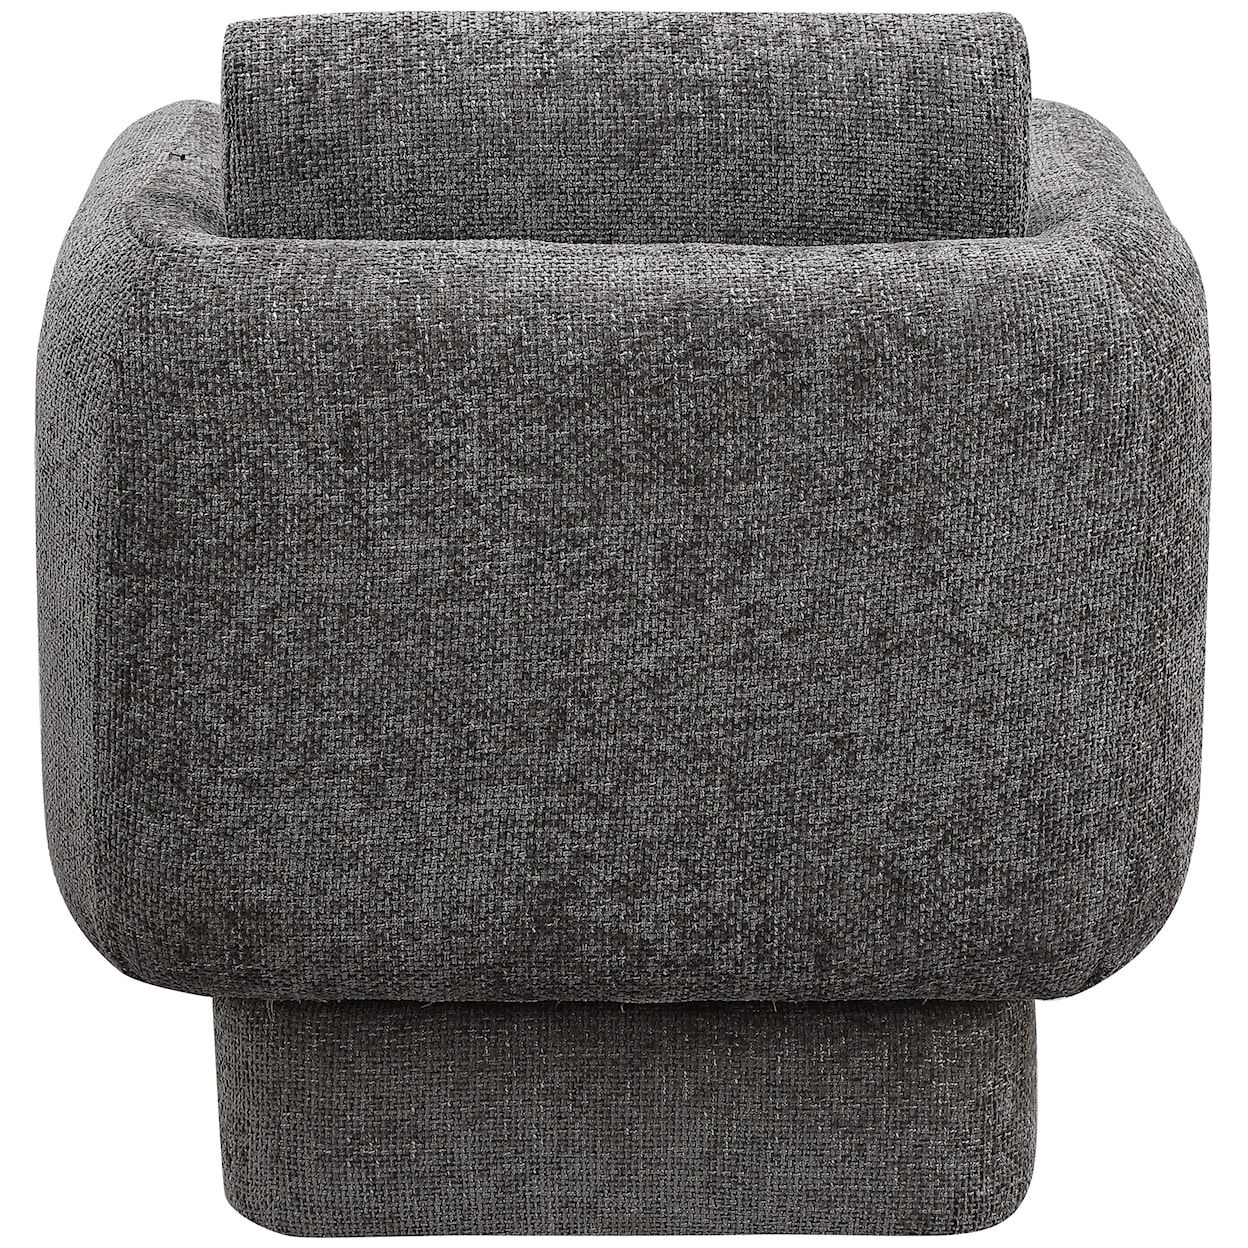 Meridian Furniture Alessandra Swivel Accent Chair